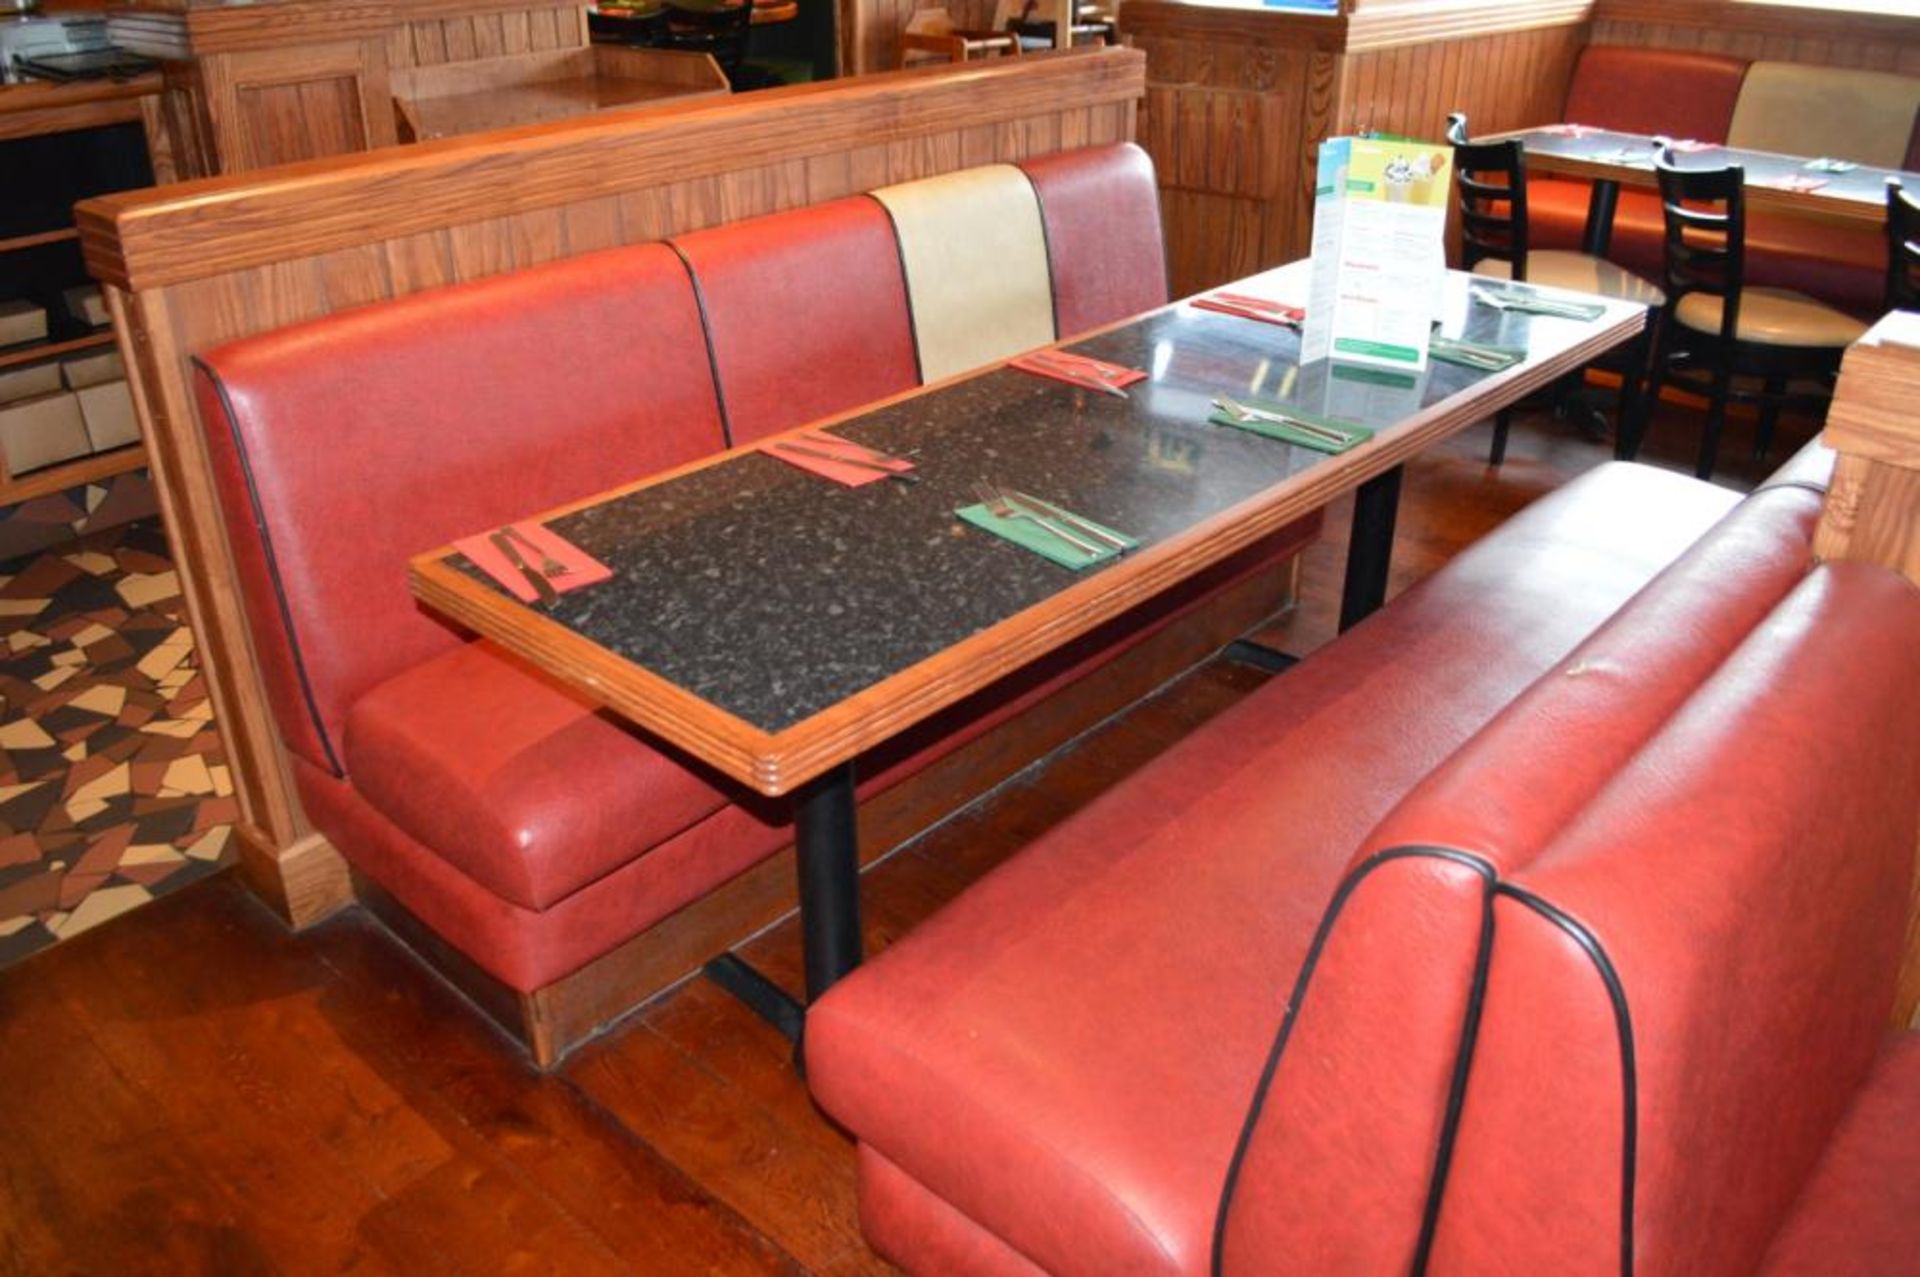 1 x Selection of Cosy Bespoke Seating Booths in a 1950's Retro American Diner Design With Dining Tab - Image 4 of 30